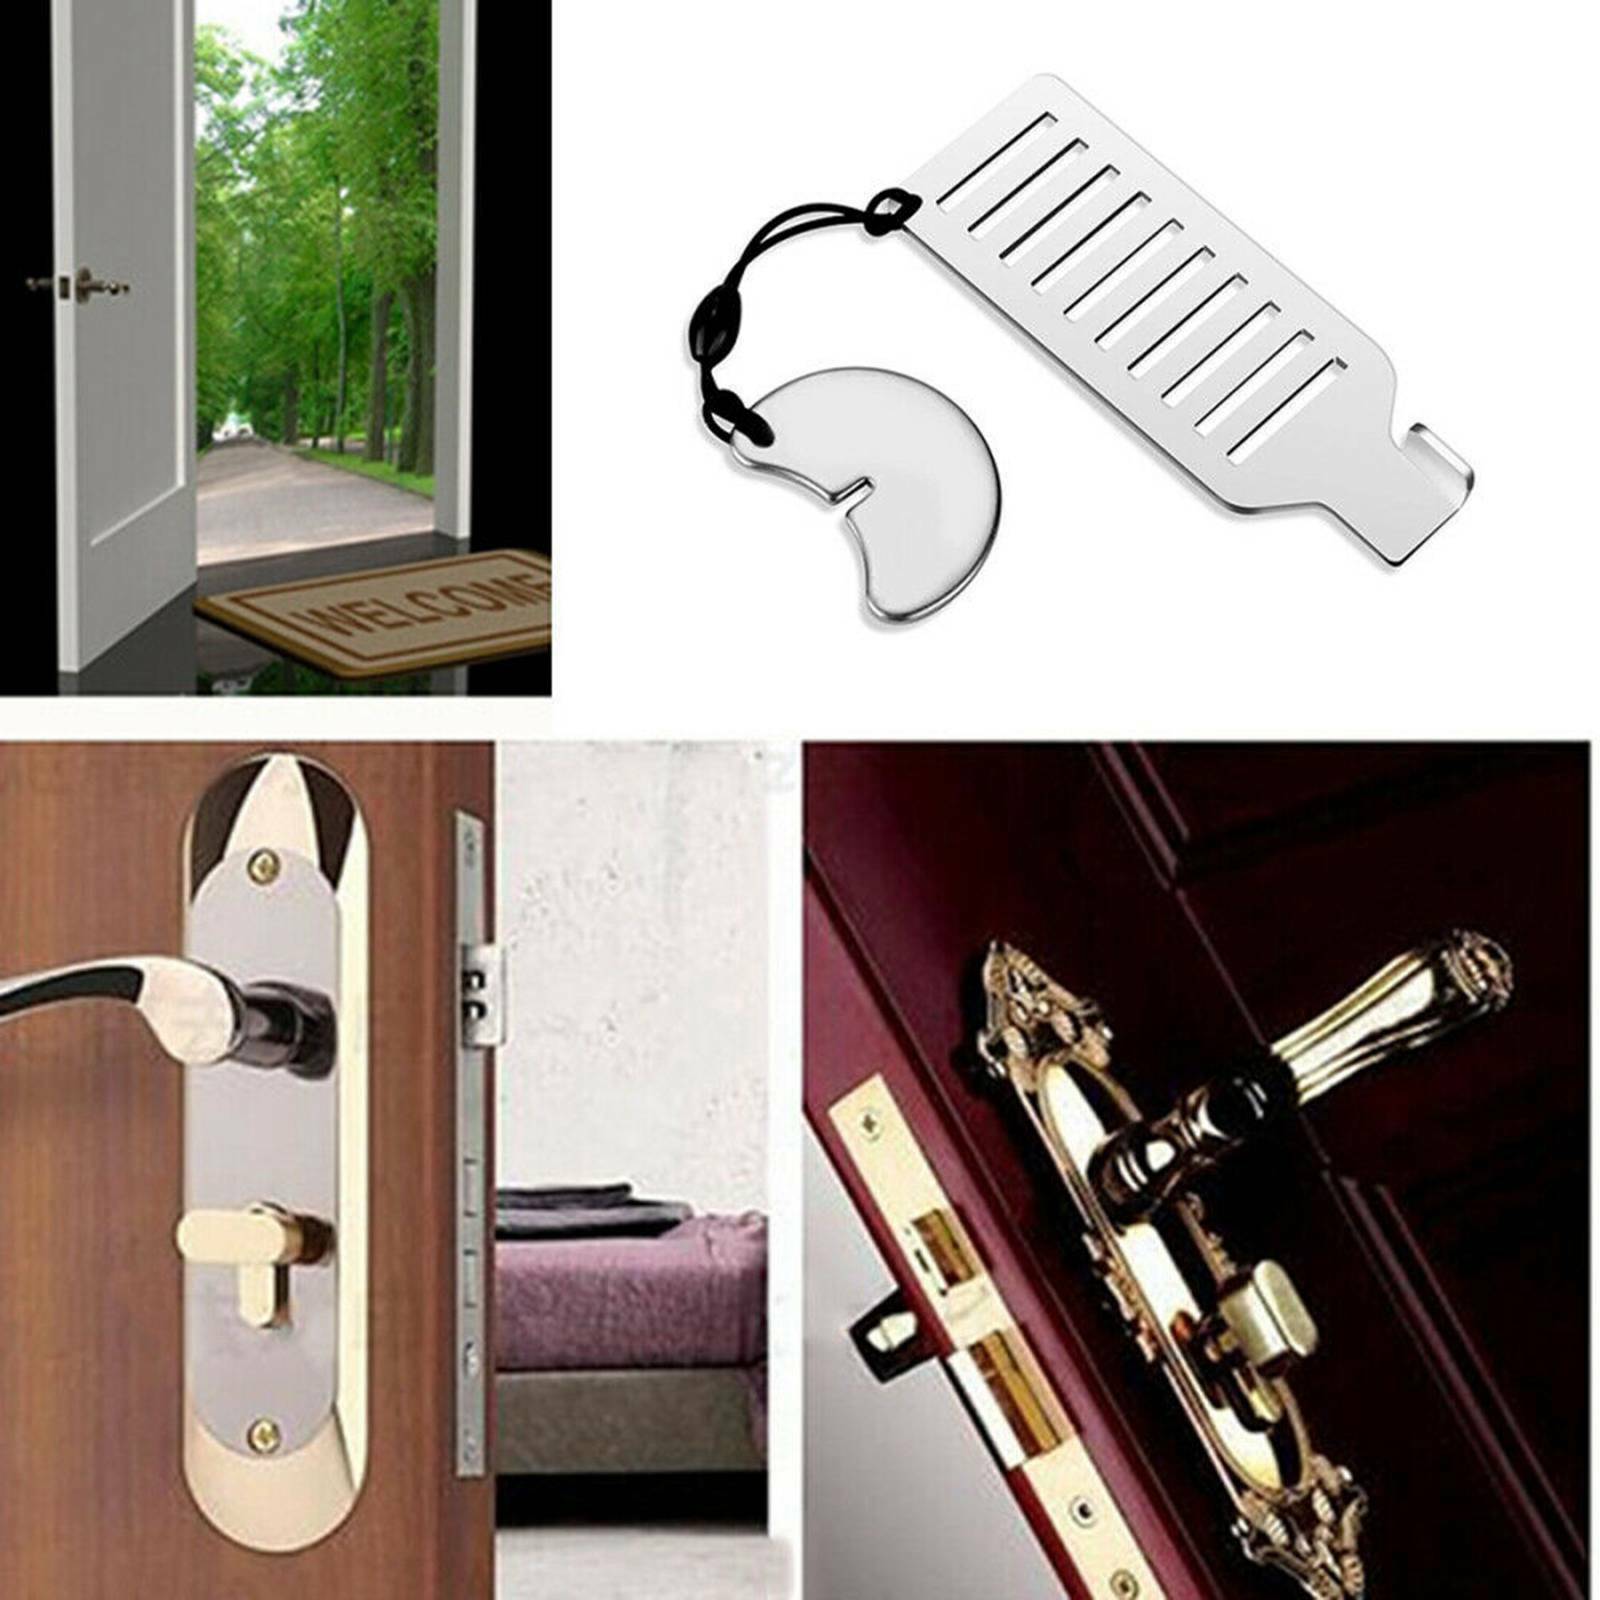 1 Set Door Lock Hardware Safety Security Tool Home Privacy Travel Hotel Portable